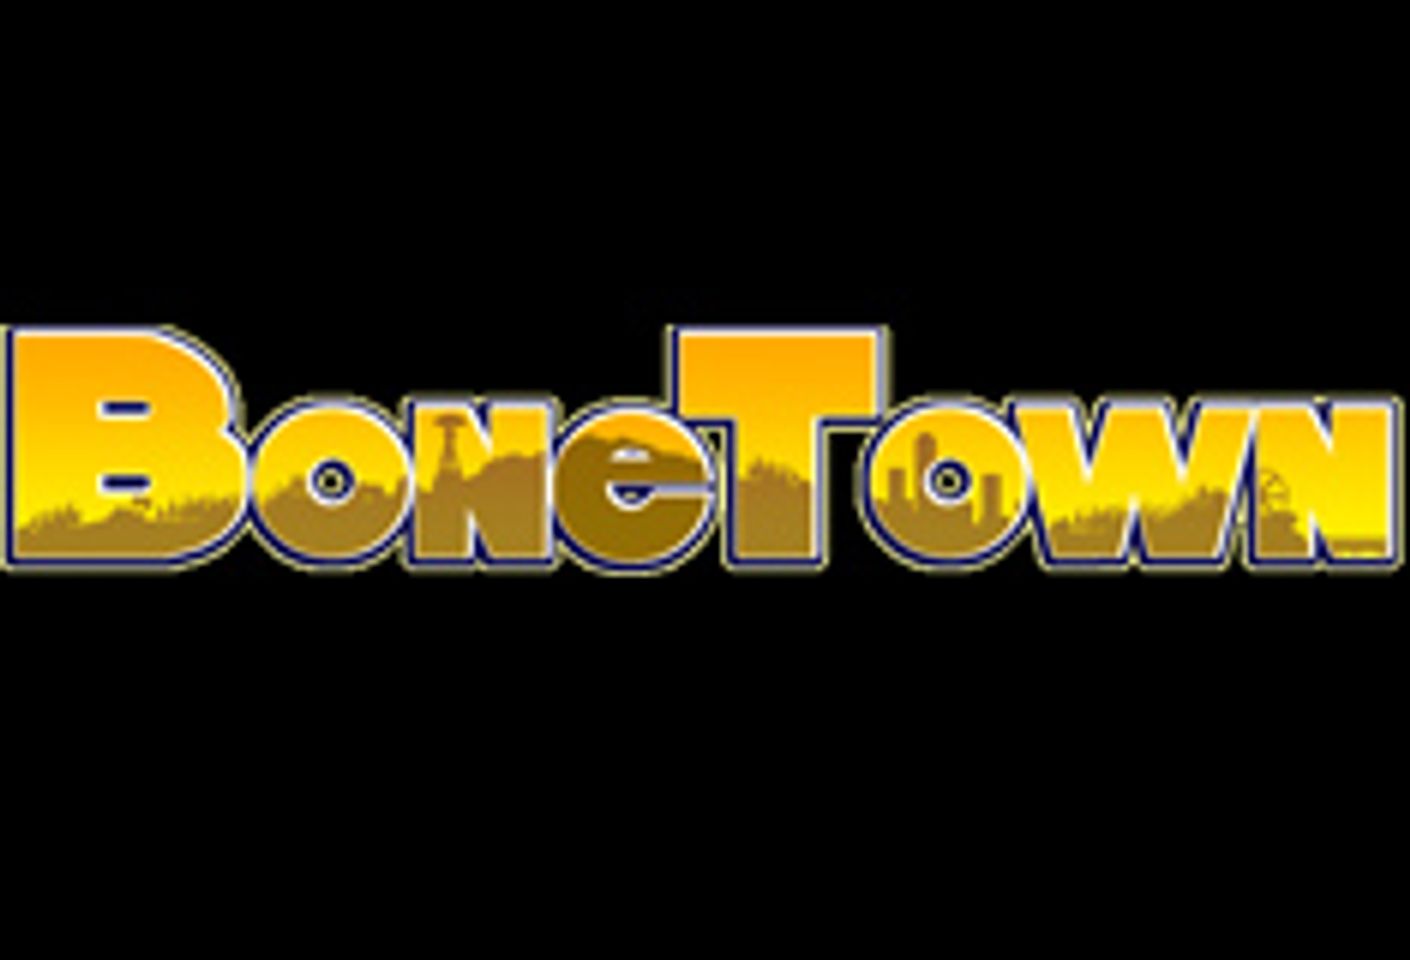 SugarDVD Provides Live-Action XXX Content for 'BoneTown' Game